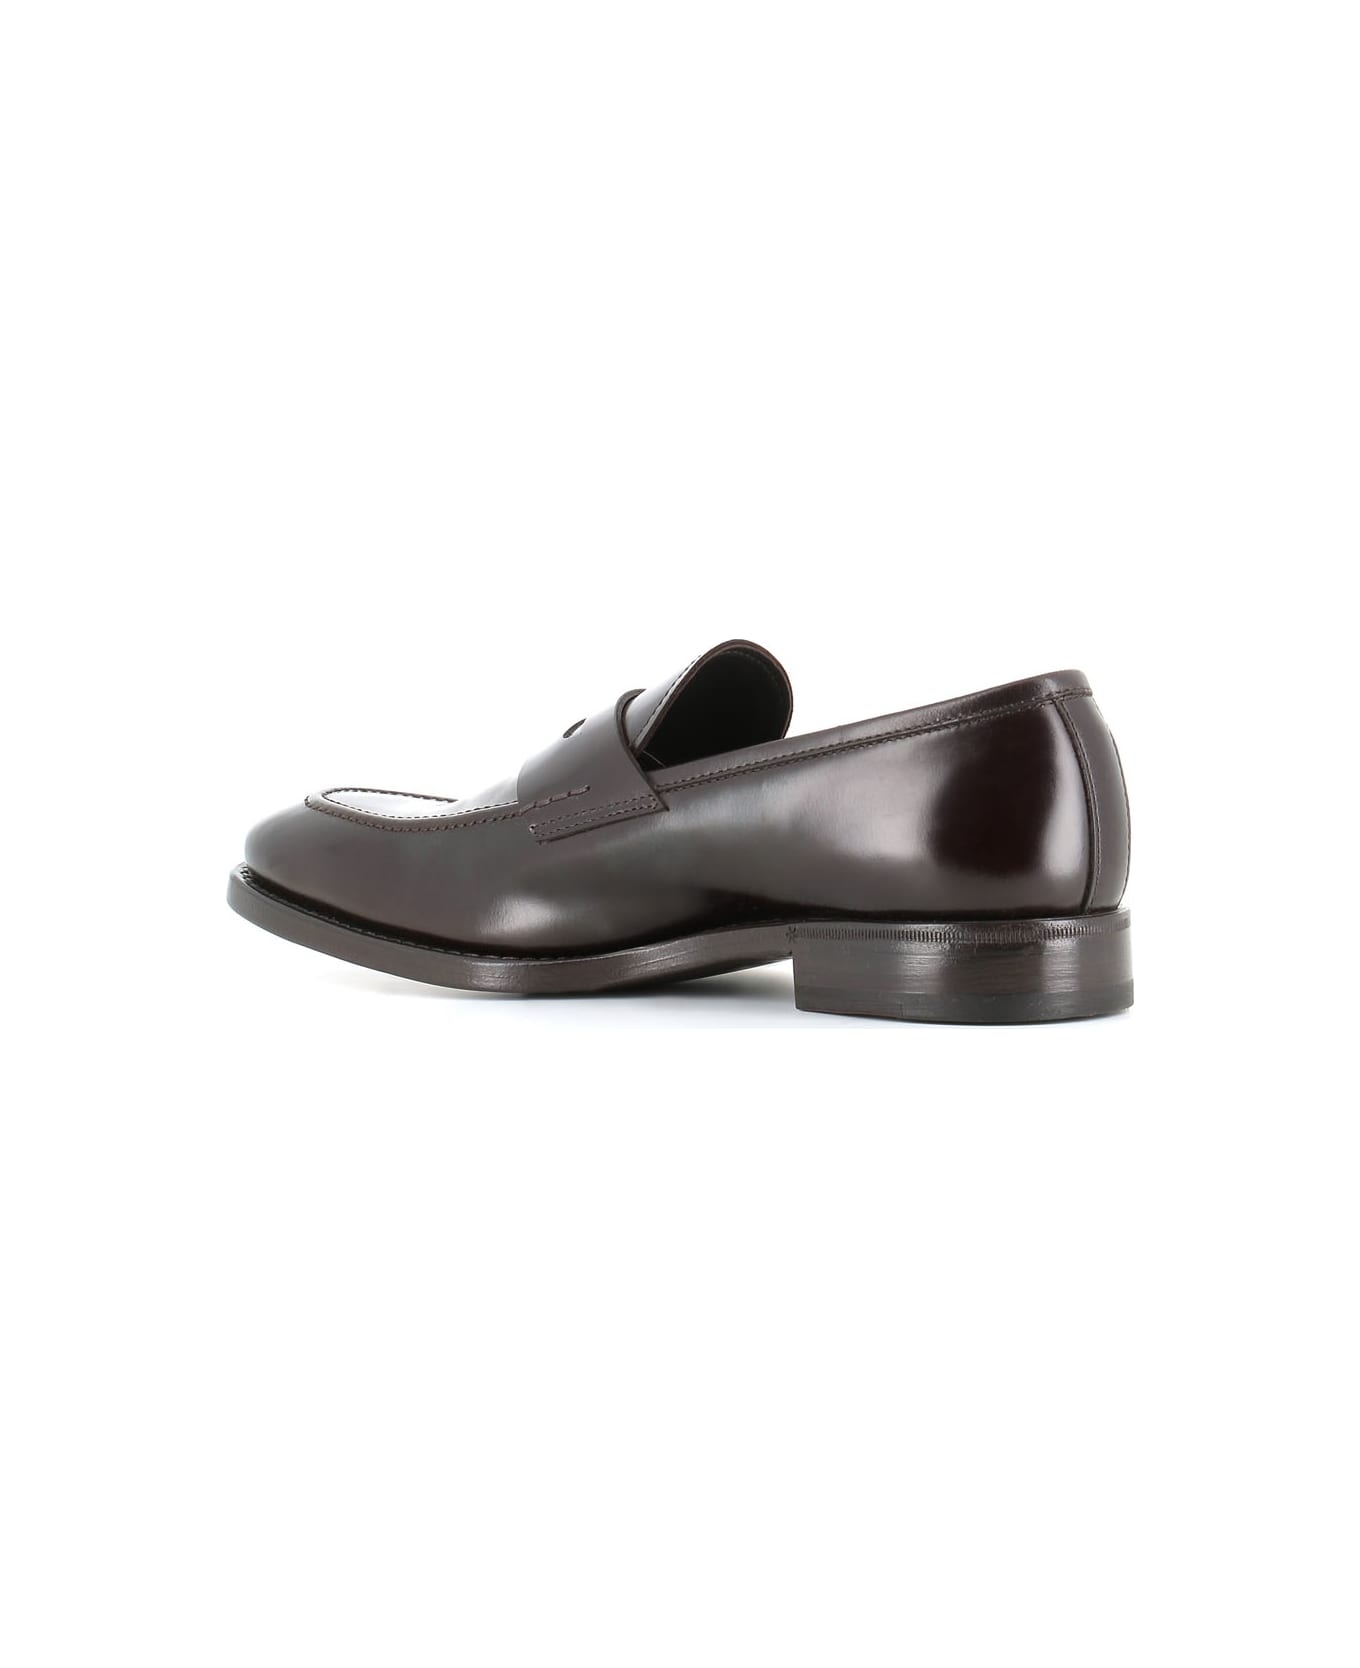 Henderson Baracco Classic Penny Loafers - Brown